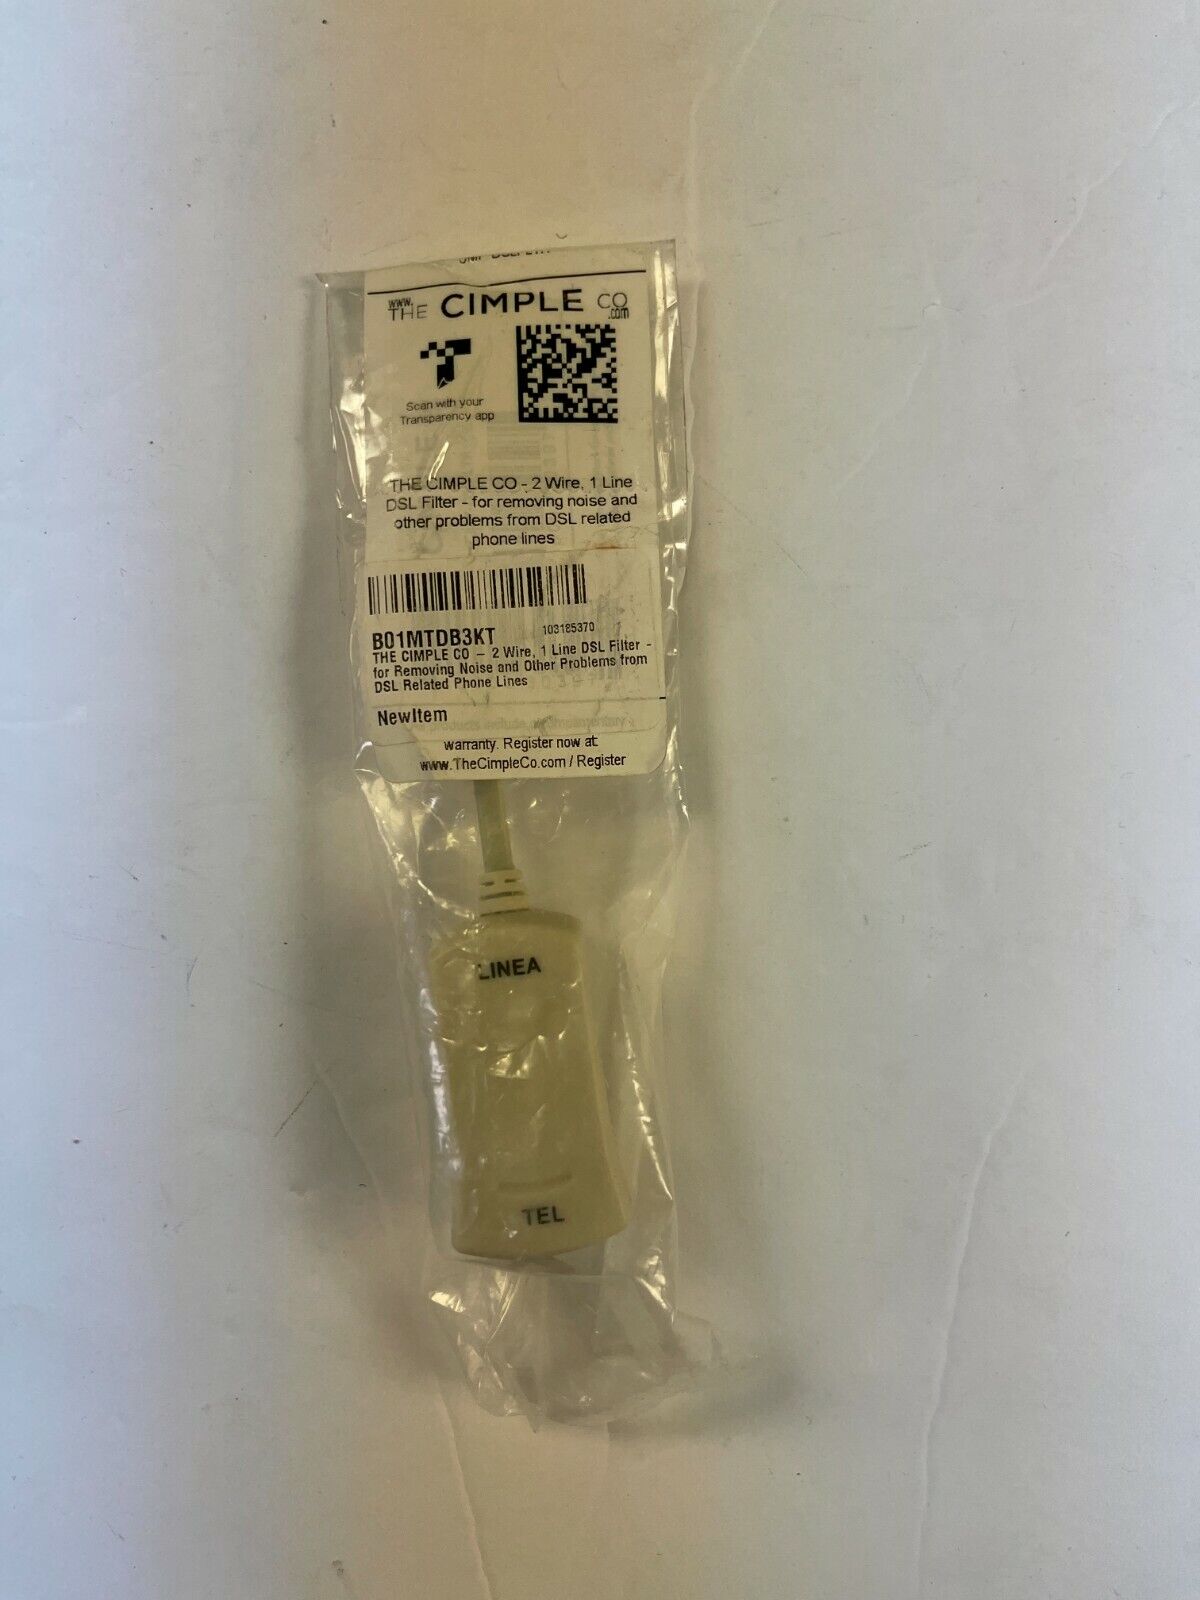 THE CIMPLE CO-2 Wire,1Line DSL Filte for removing noise from DSL related phone